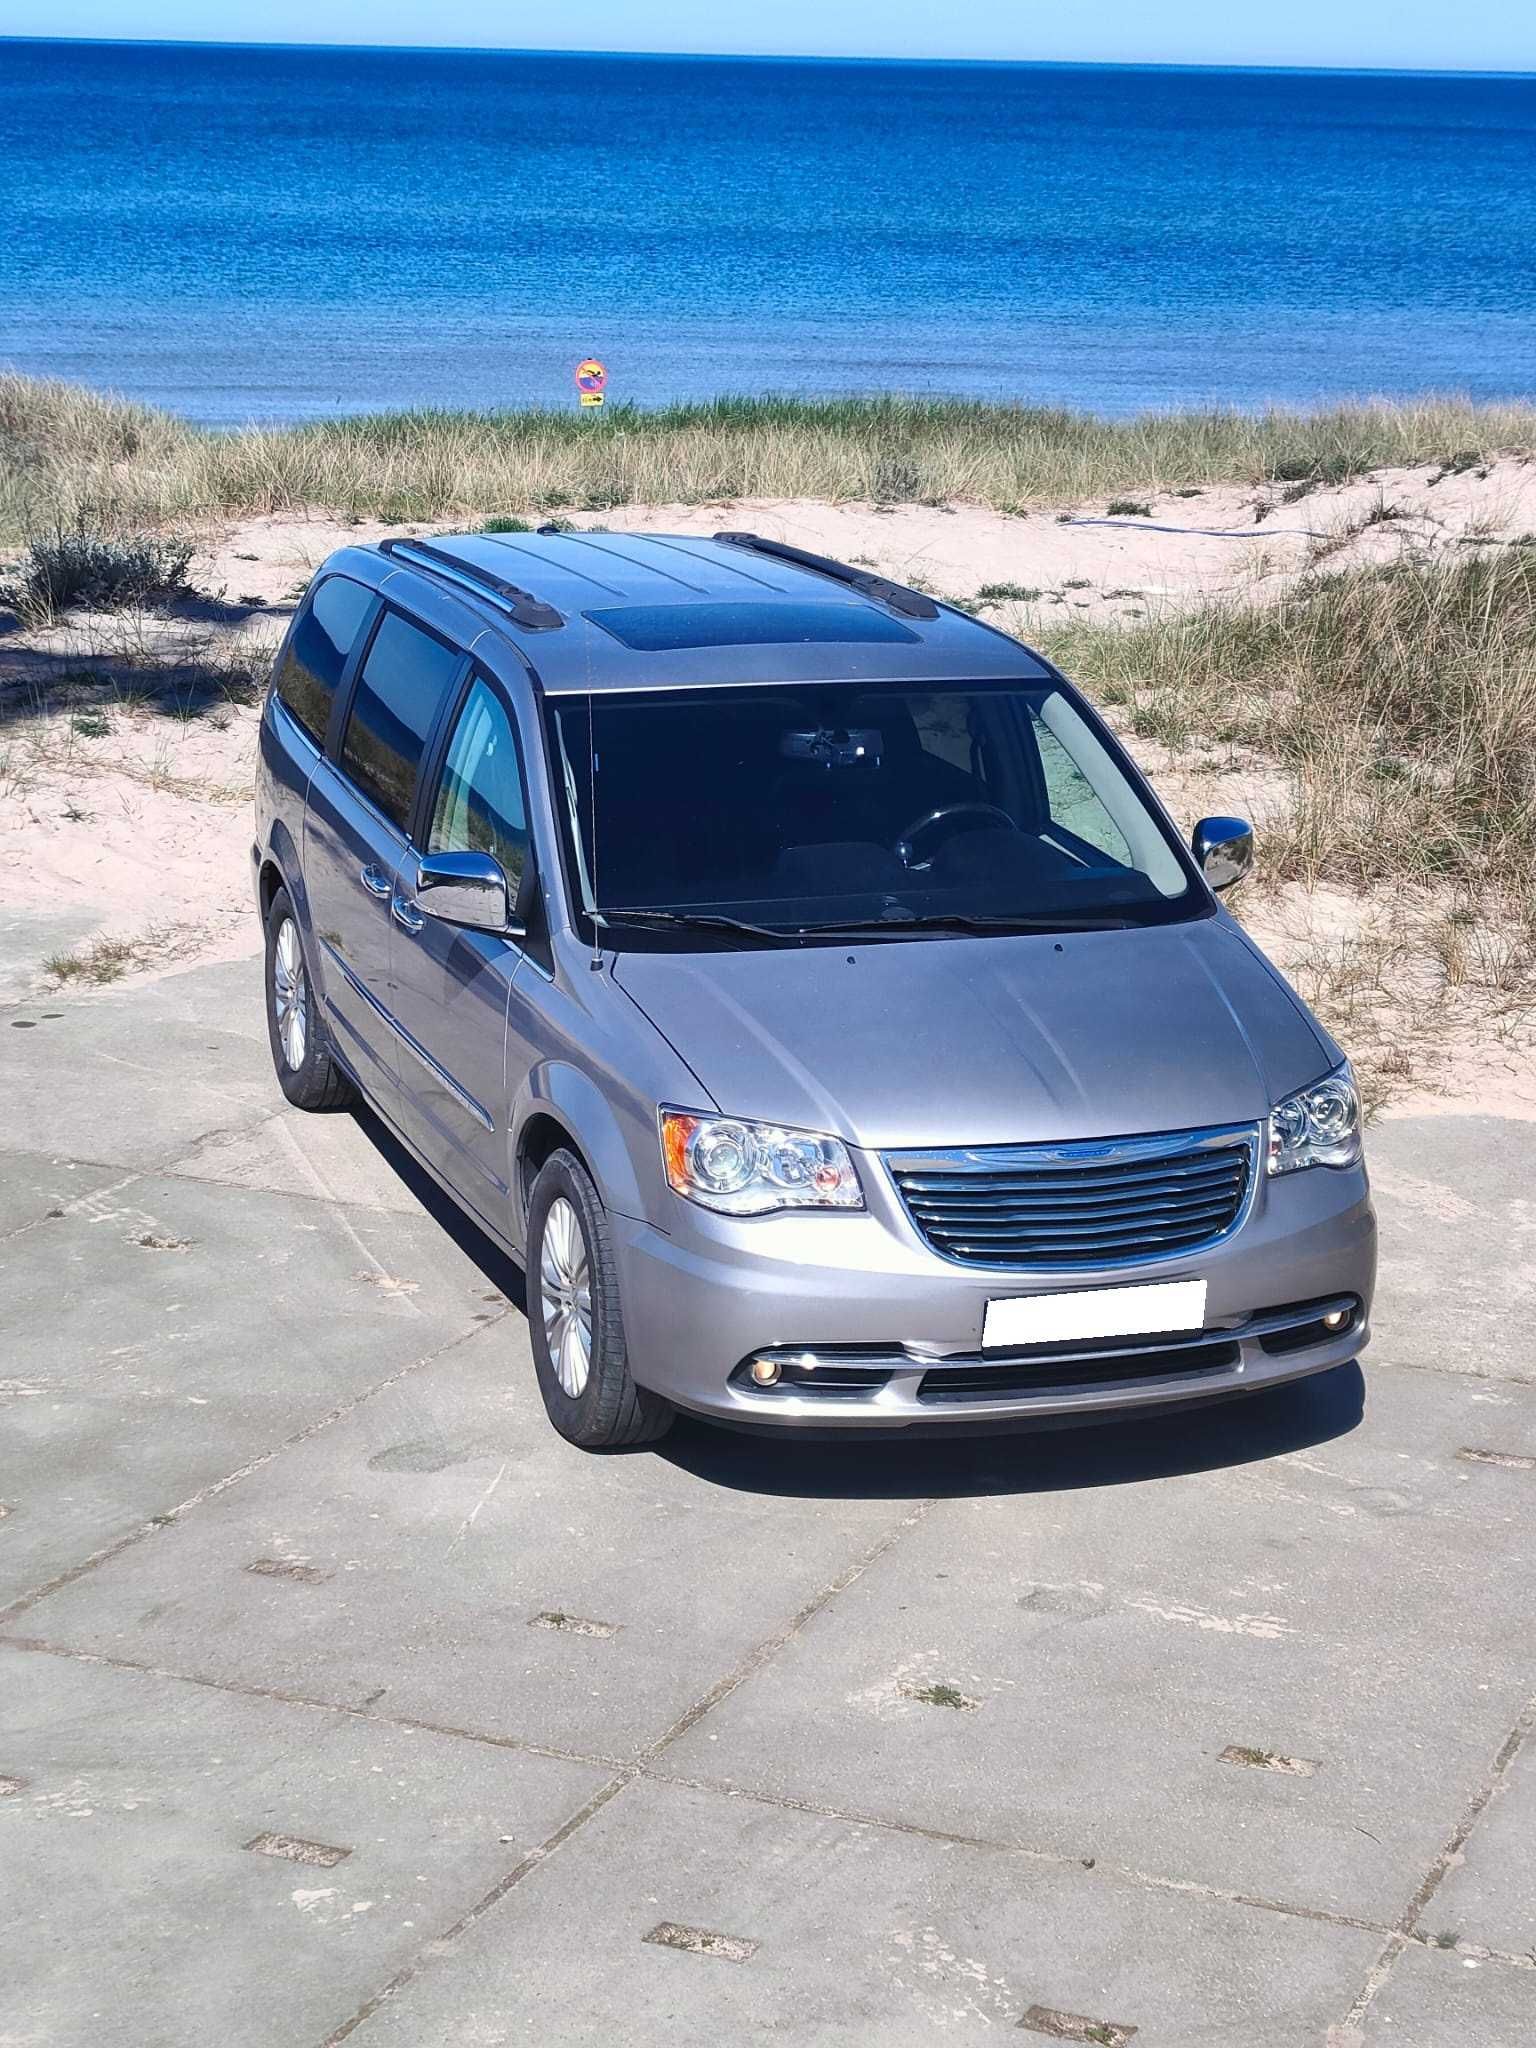 2014 Chrysler Town & Country Limited max wersja